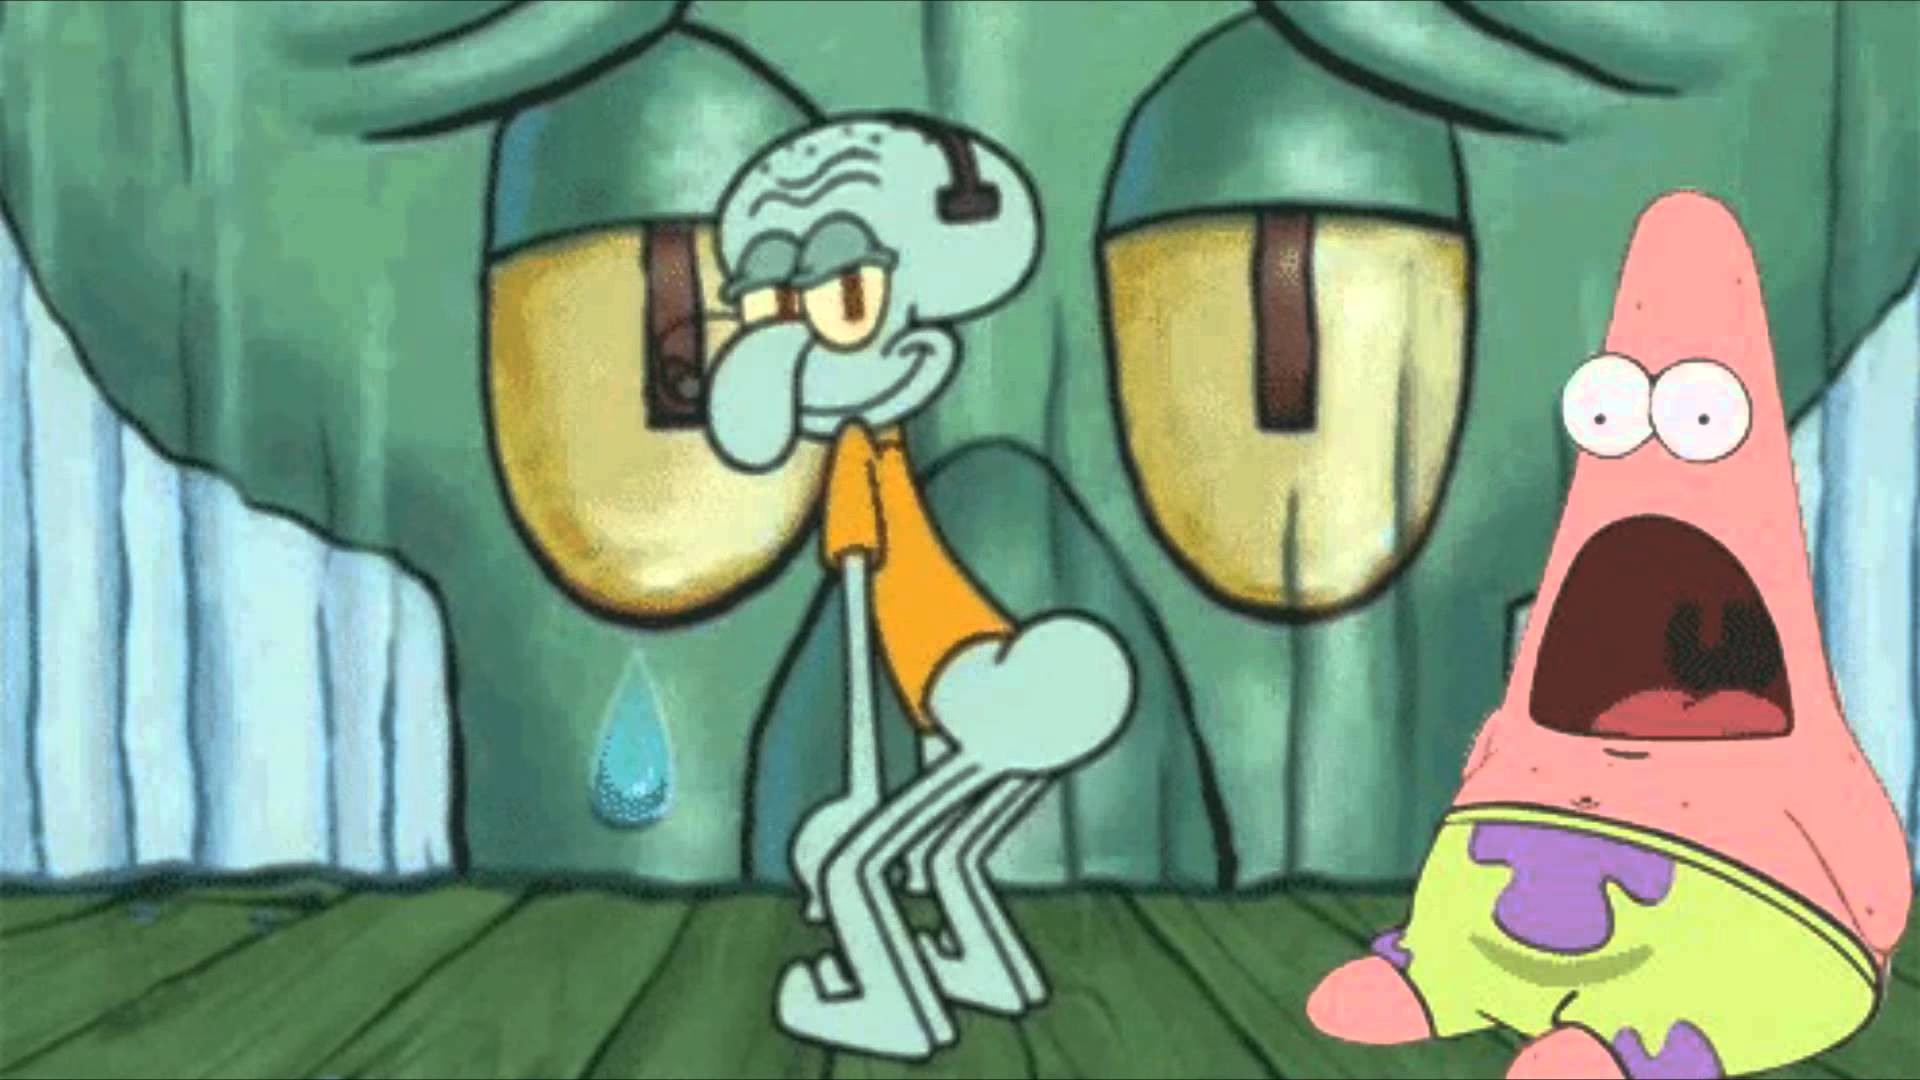 4 hd squidward wallpapers on squidward aesthetic hd wallpapers